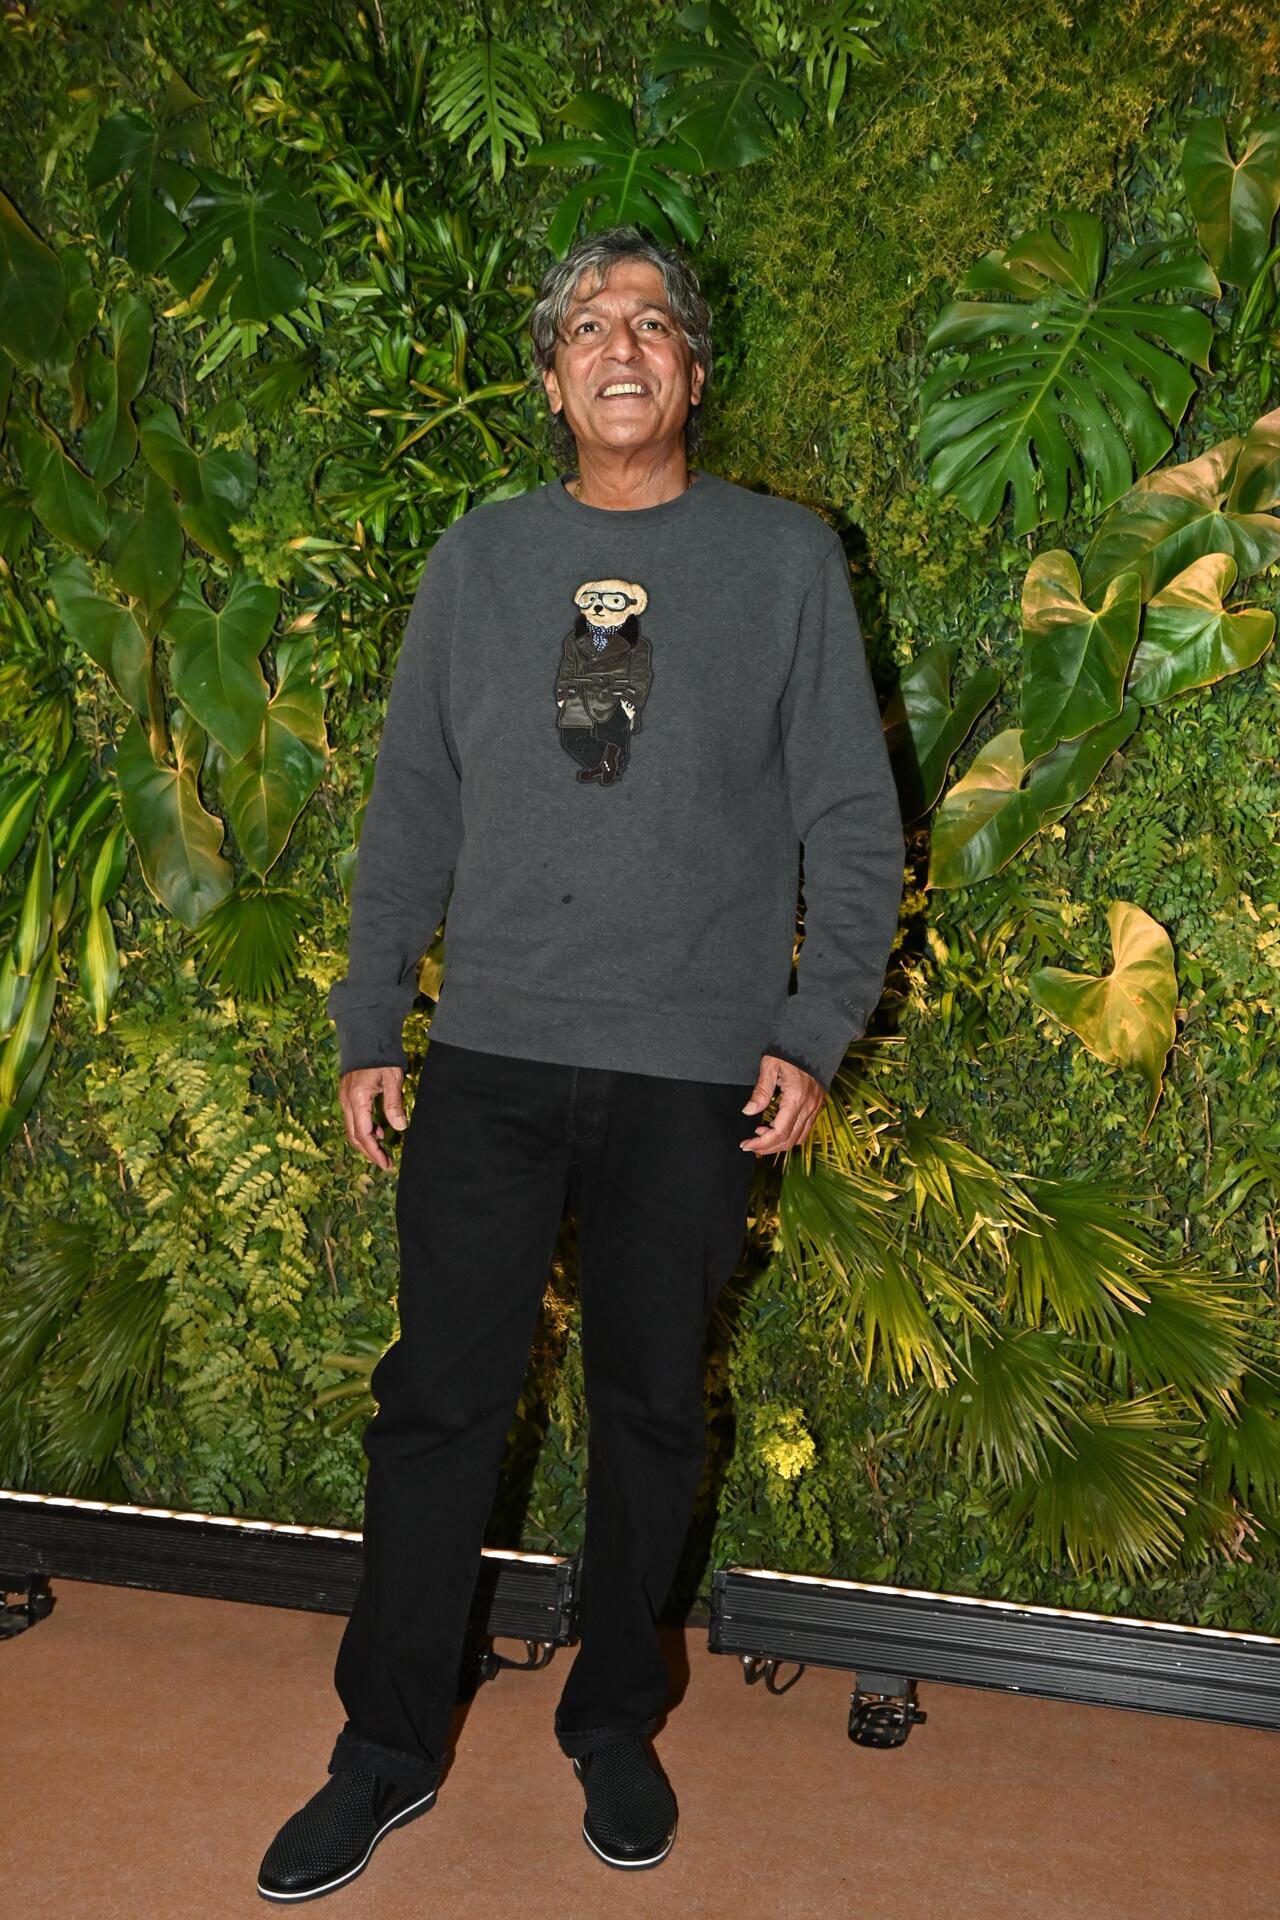 Chunky Pandey gives a heart smile as he poses for the paparazzi 